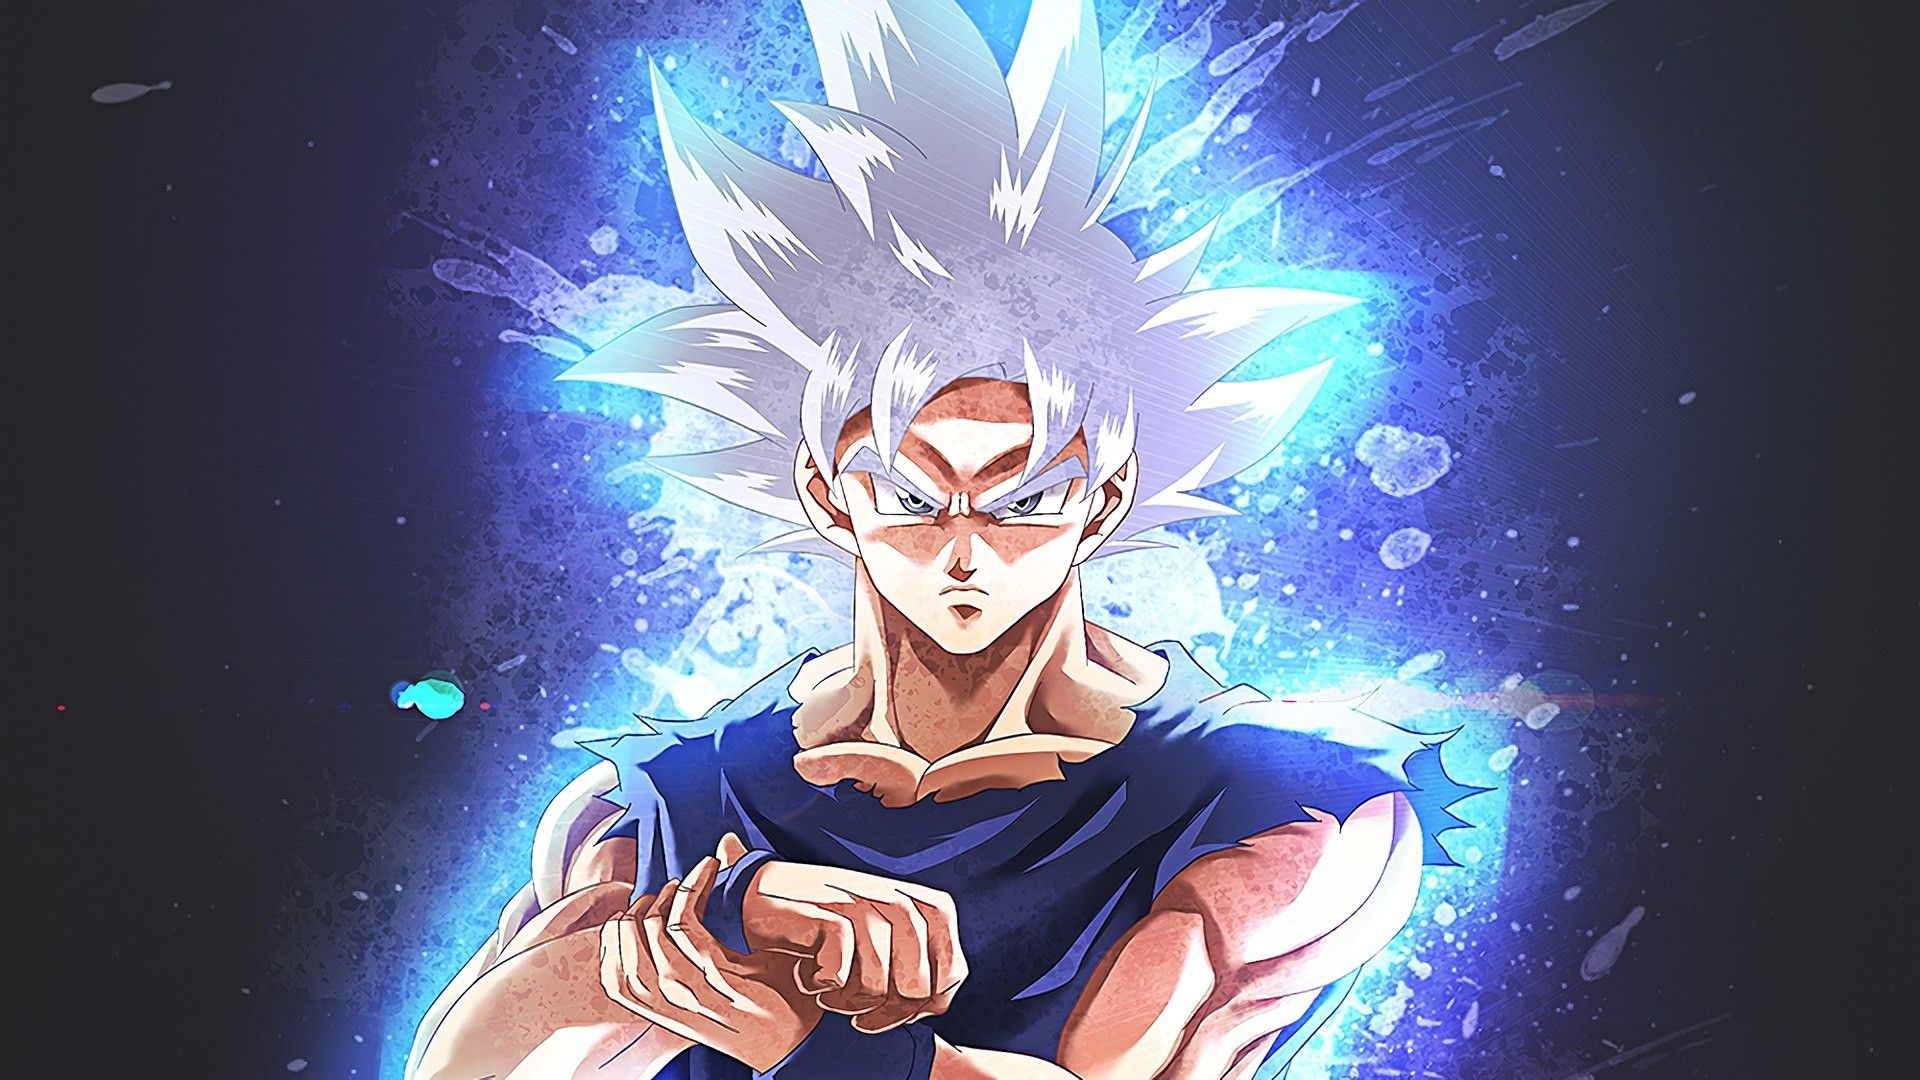 Goku's Power-Up: Blue Kaioken with White Hair - wide 5